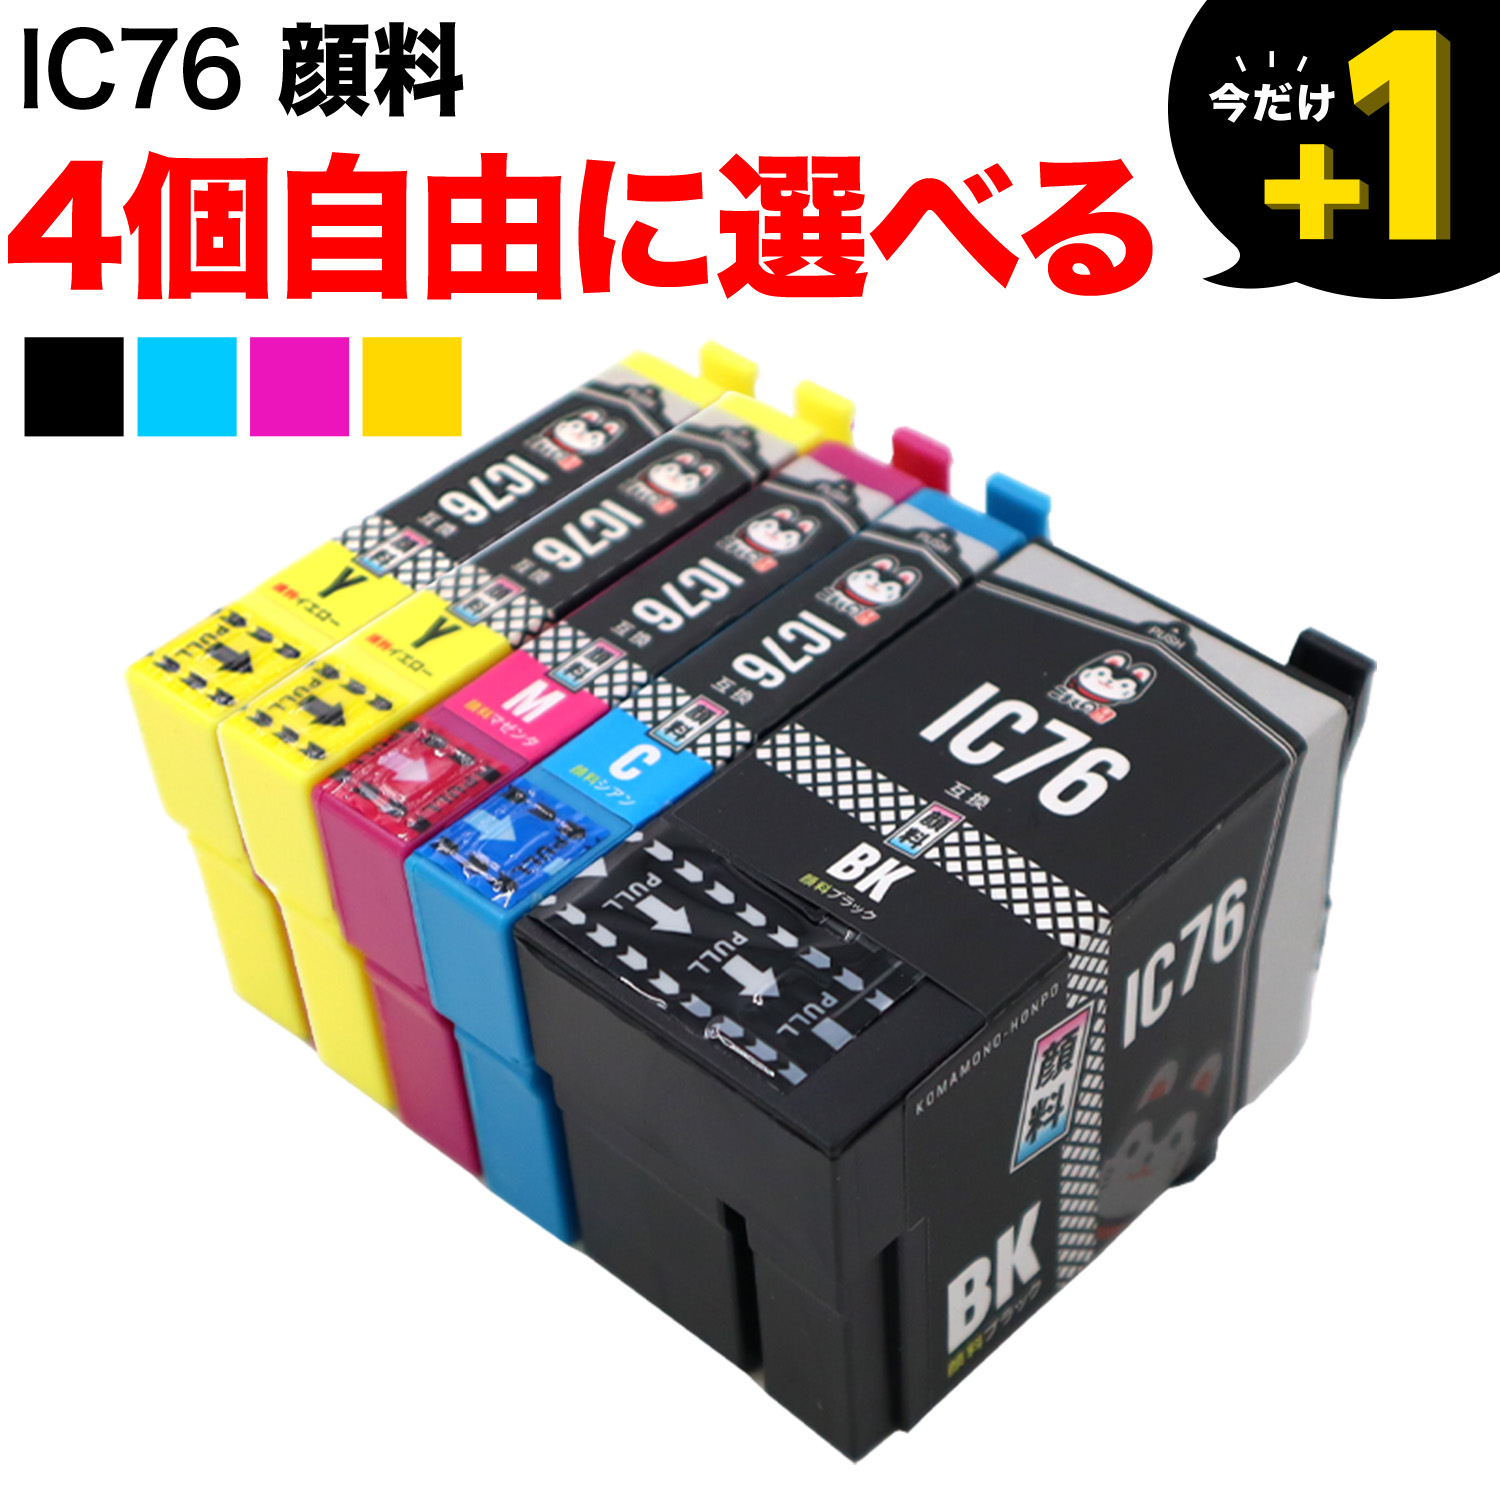 EPSON 純正インク IC76 インクカートリッジ 大容量 4色セット IC4CL76 PX-M5040C6 PX-M5040C7 PX-M5040F PX-M5041C6 PX-M5041C7 - 4